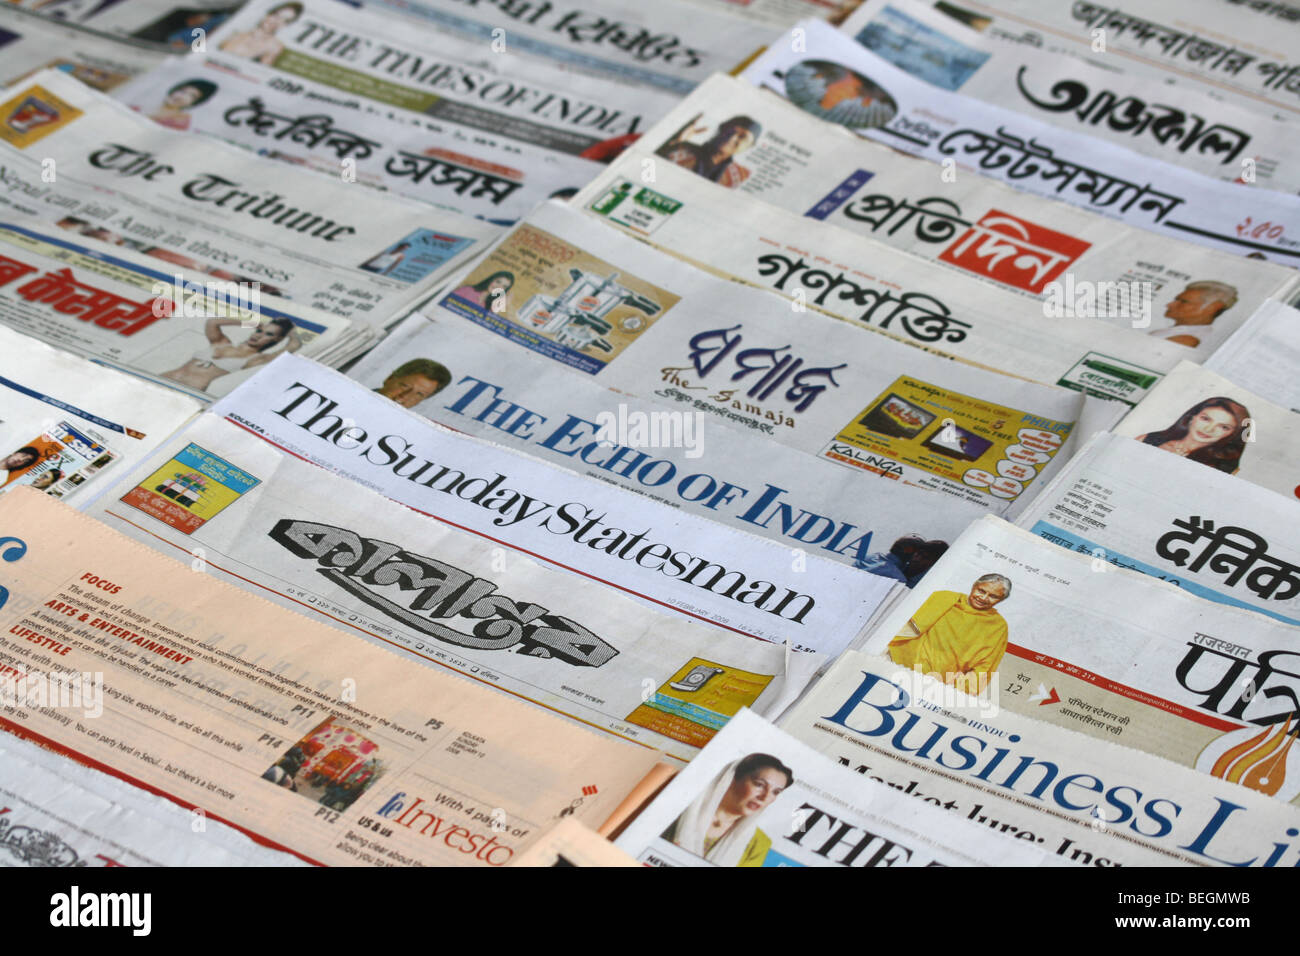 Stack of India's daily newspapers Stock Photo